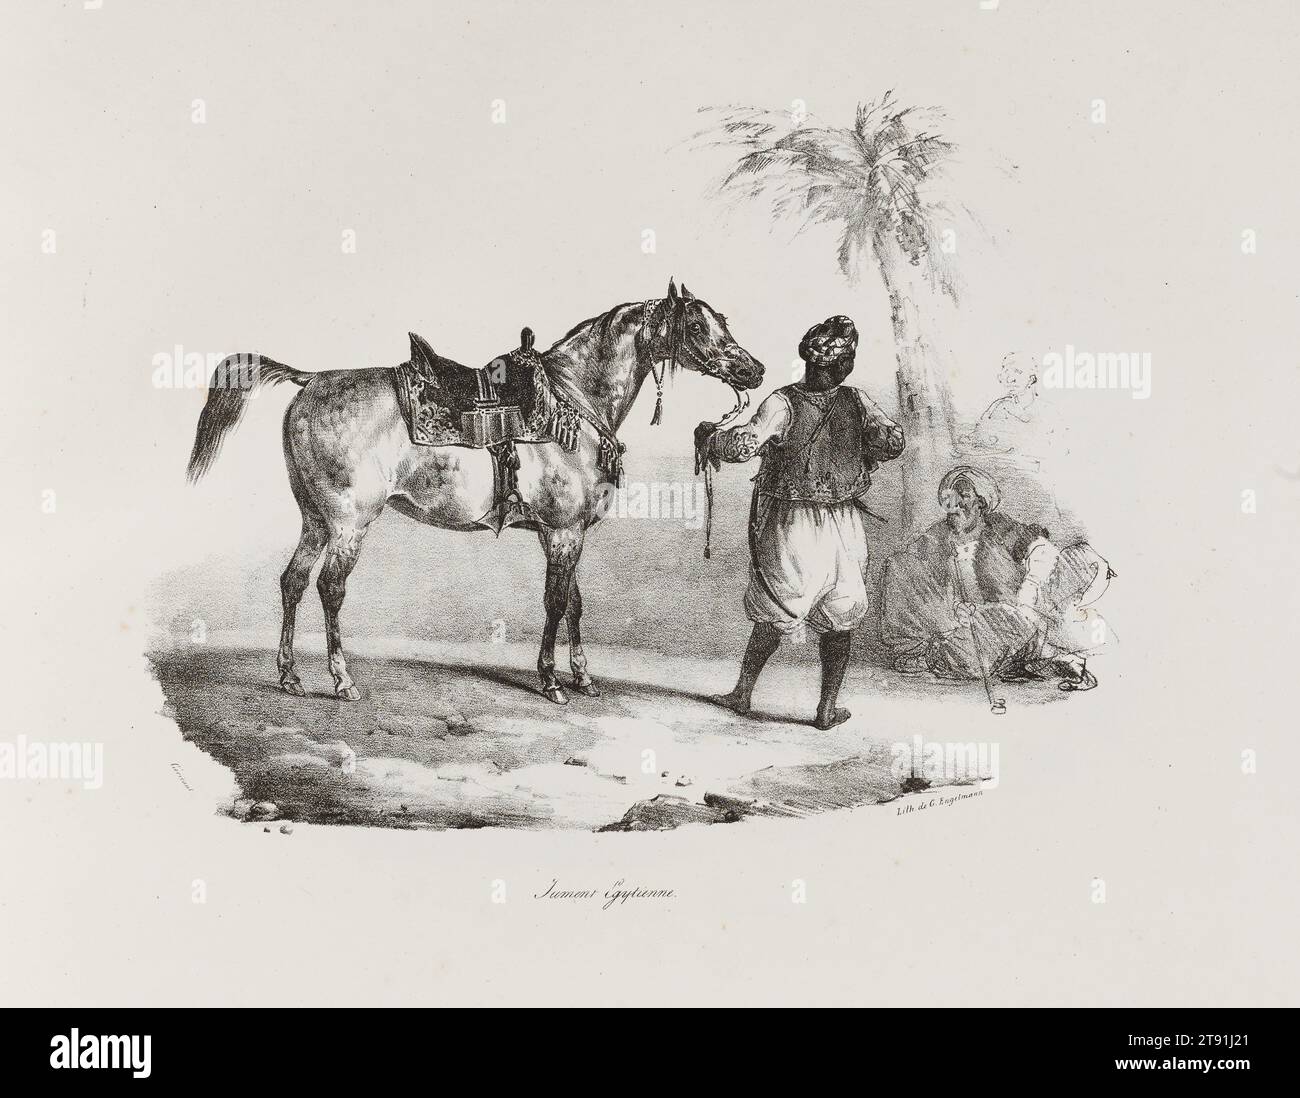 Jument Egyptienne, 1822, Jean Louis André Théodore Géricault, French, 1791 - 1824, 7 1/2 x 9 1/4 in. (19.05 x 23.5 cm) (image), Lithograph, France, 19th century Stock Photo